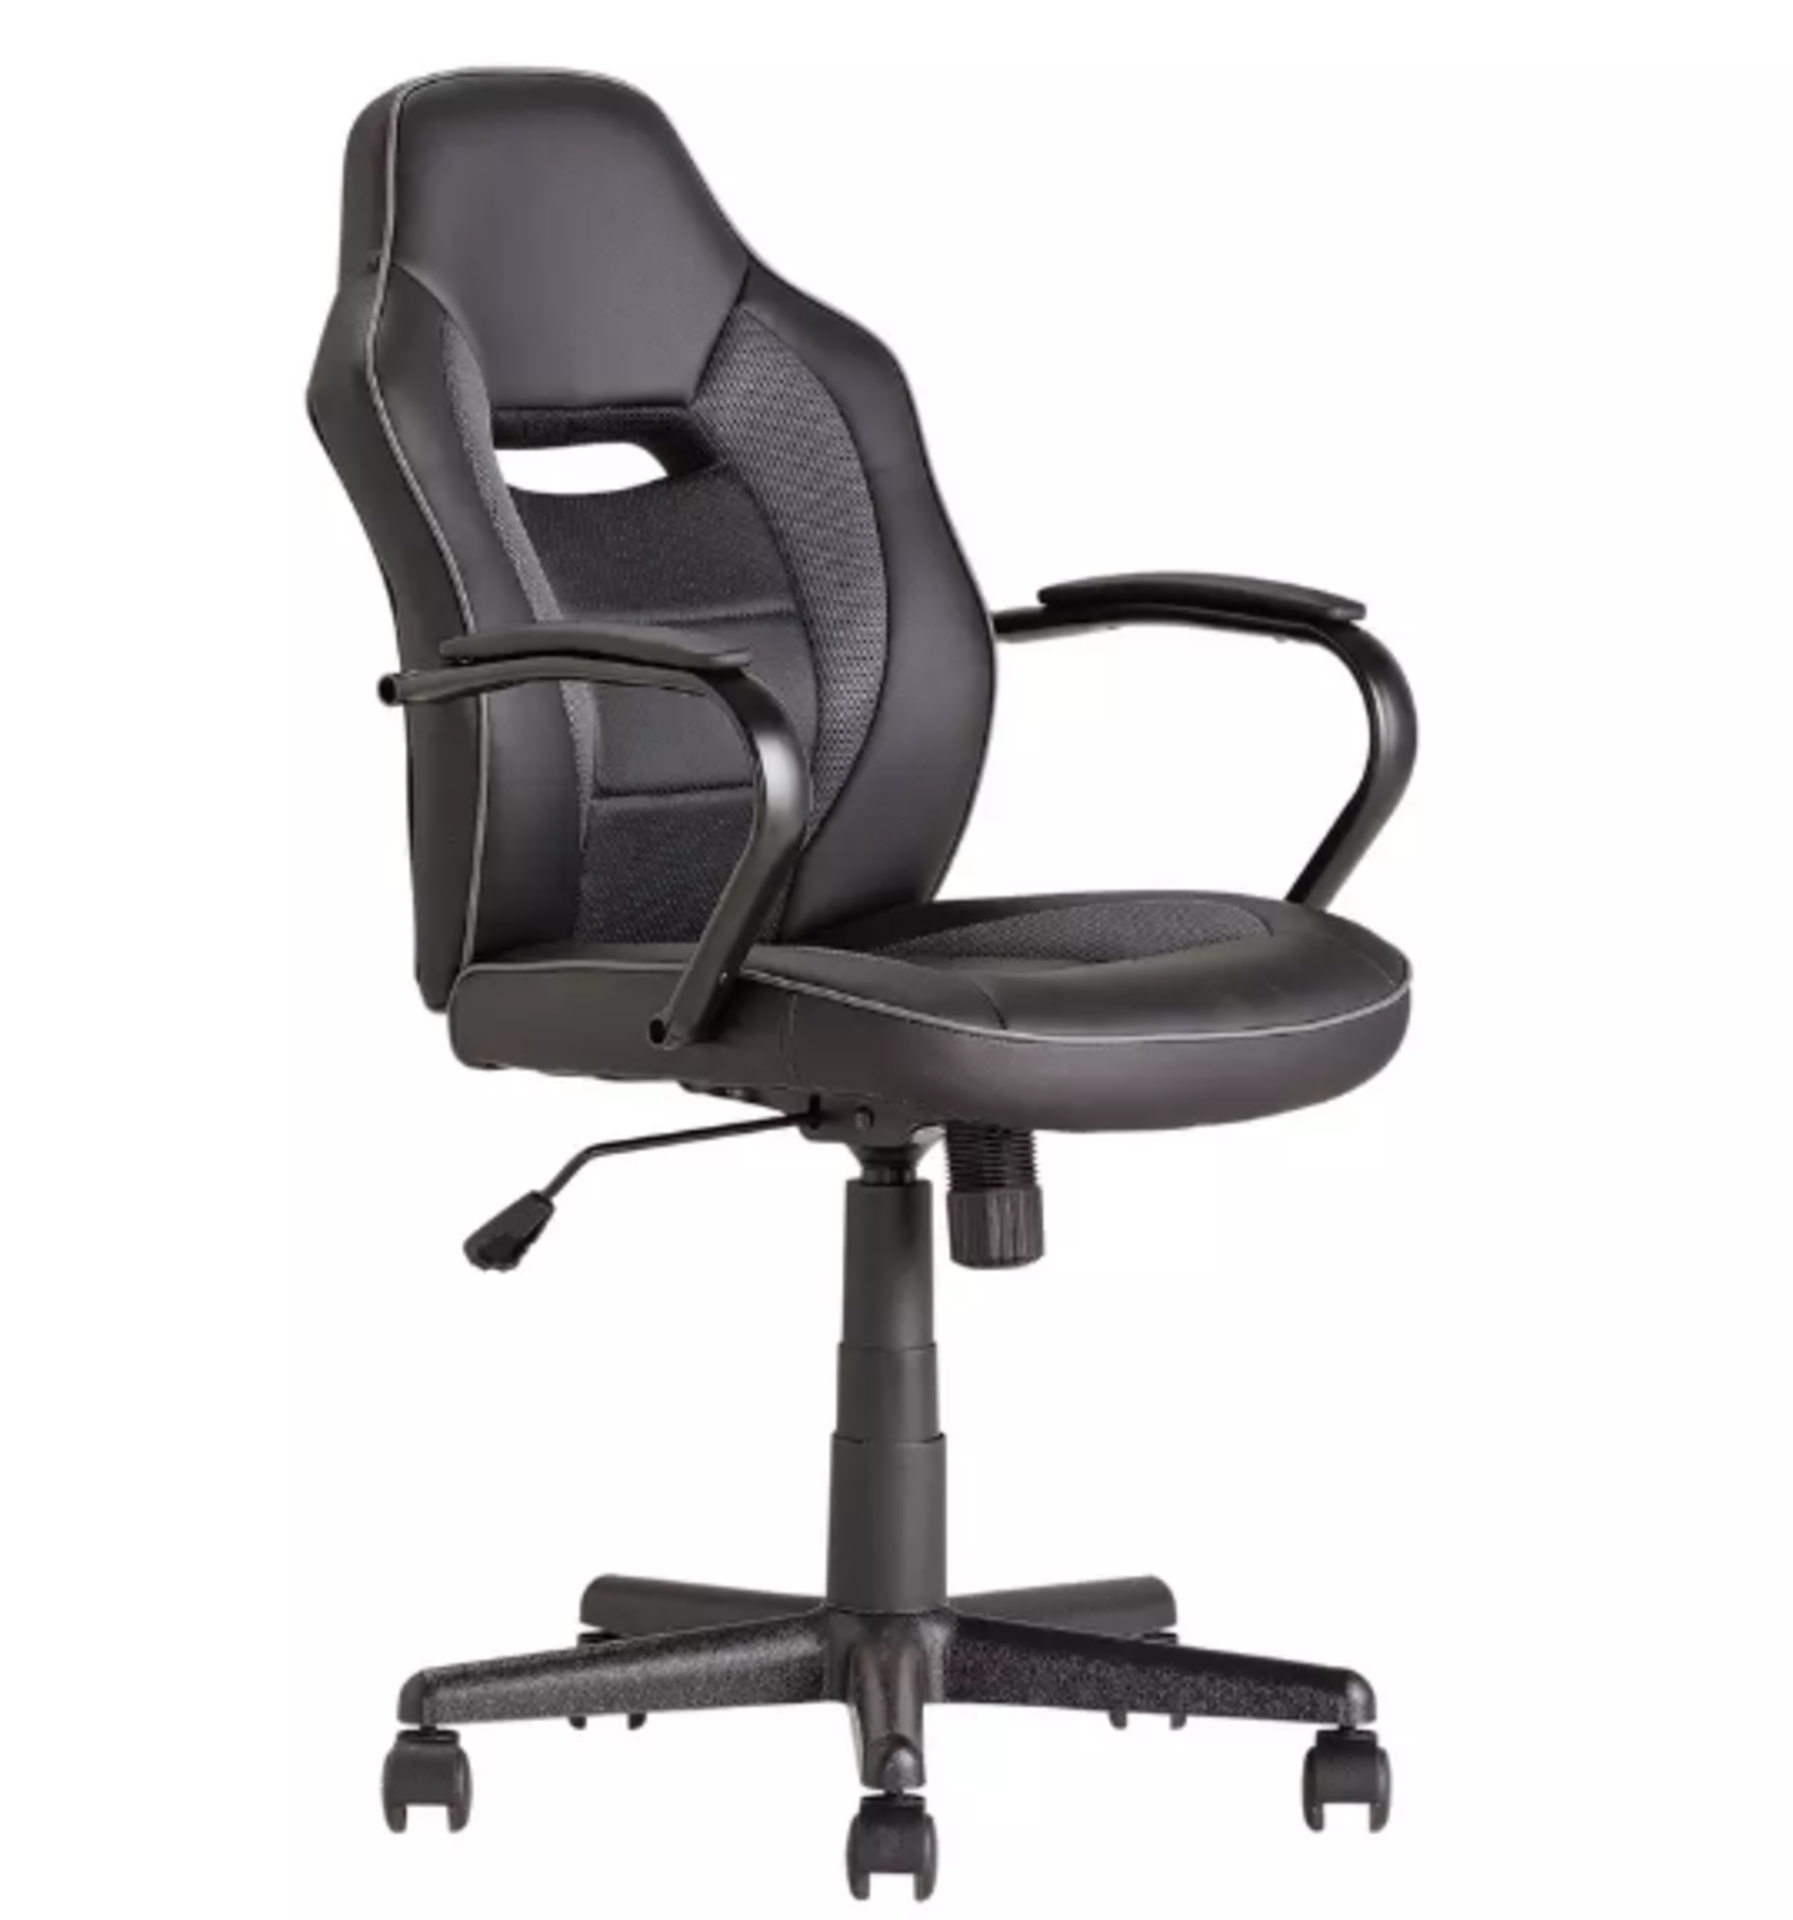 Argos Home Faux Leather Mid Back Gaming Chair - Black. RRP £125.00. Stay in the game and play for